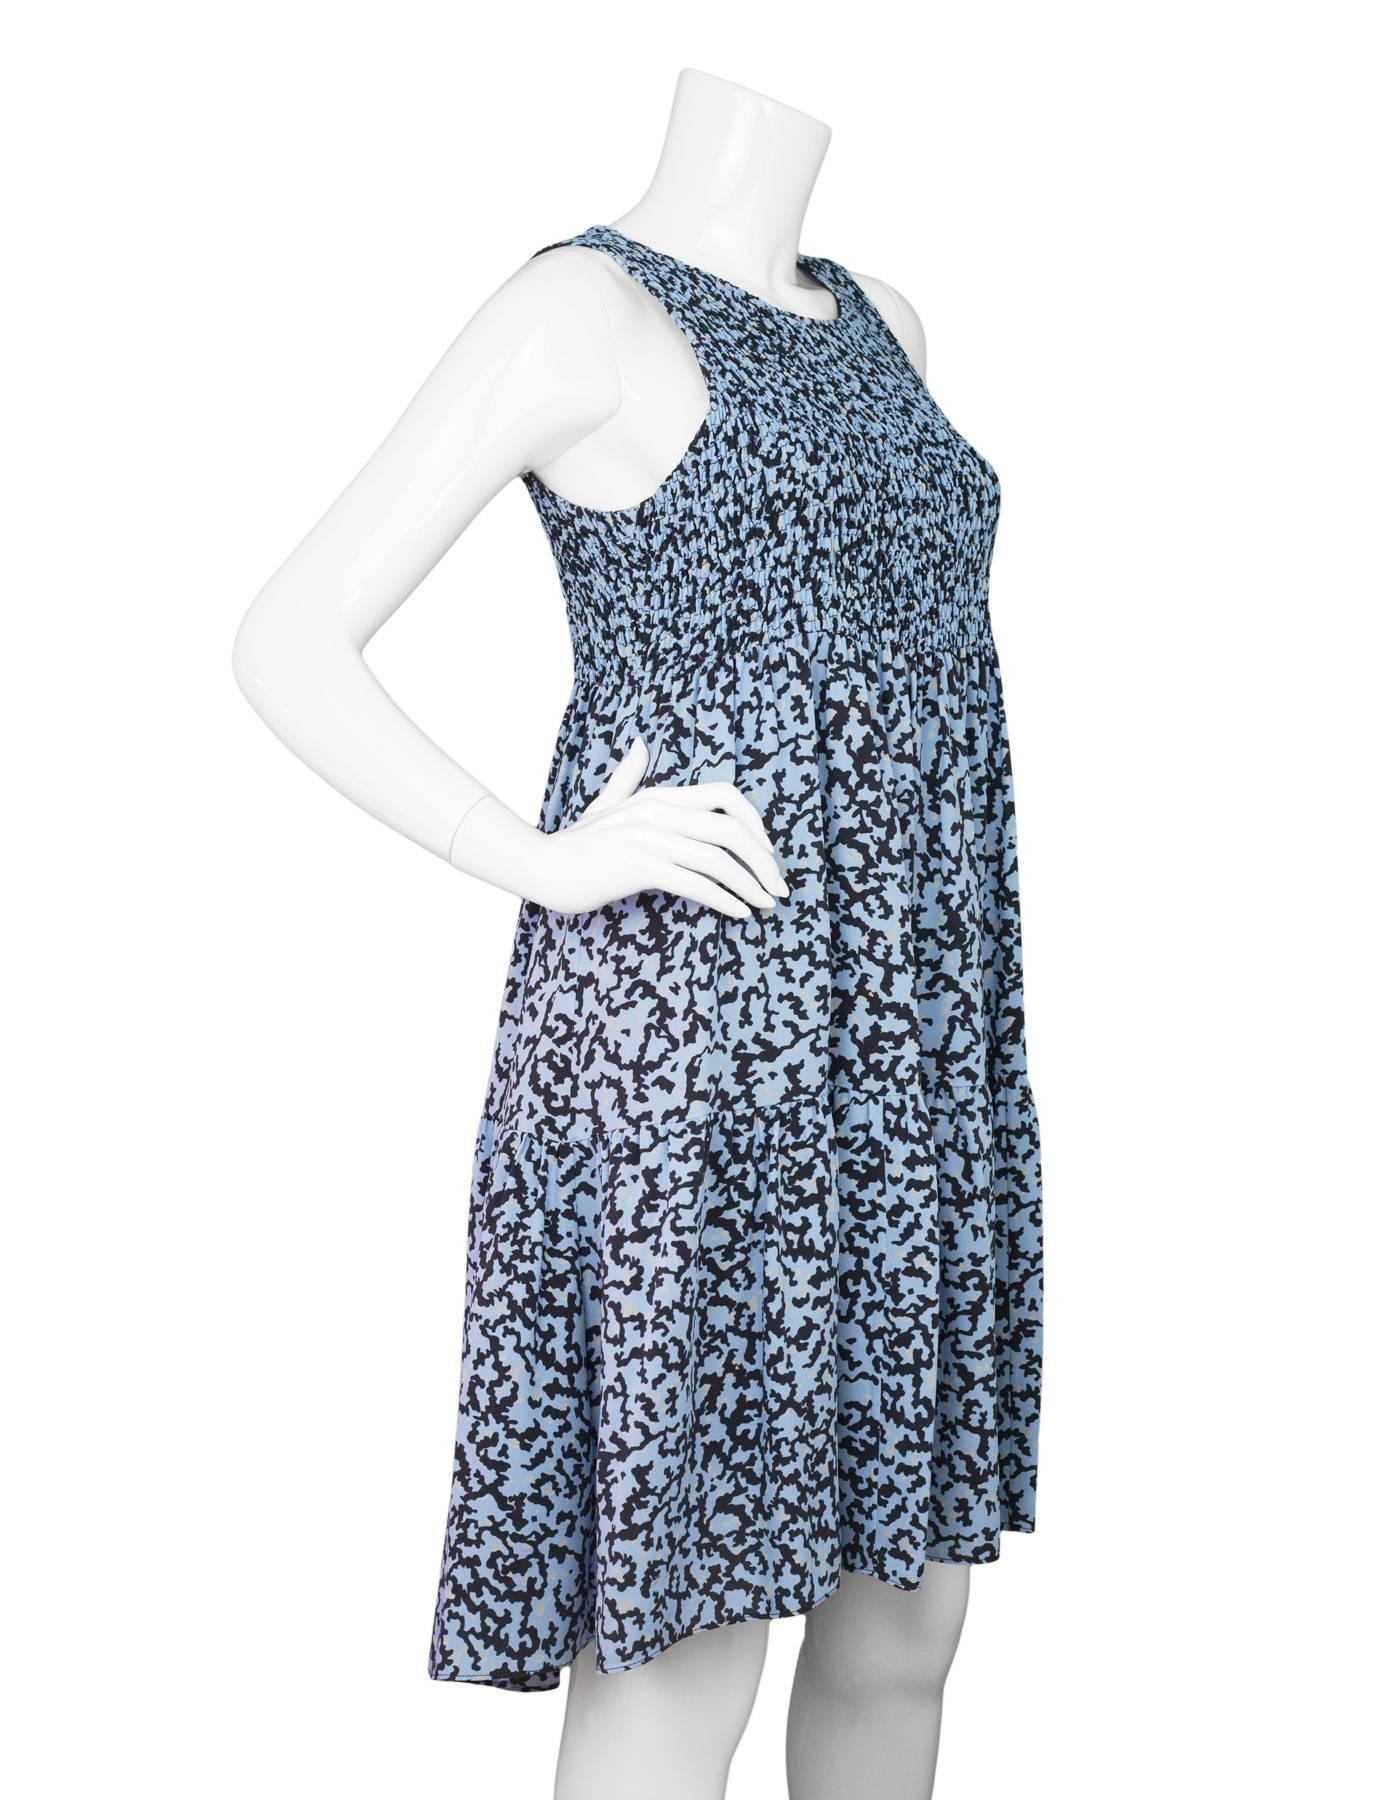 Proenza Schouler Blue Floral Print Silk Dress 
Features stretched ruched bustline

Made In: China
Color: Light blue, navy and yellow
Composition: 100% silk
Lining: Navy, 95% silk, 5% spandex
Closure/Opening: Pull over with one back neck button